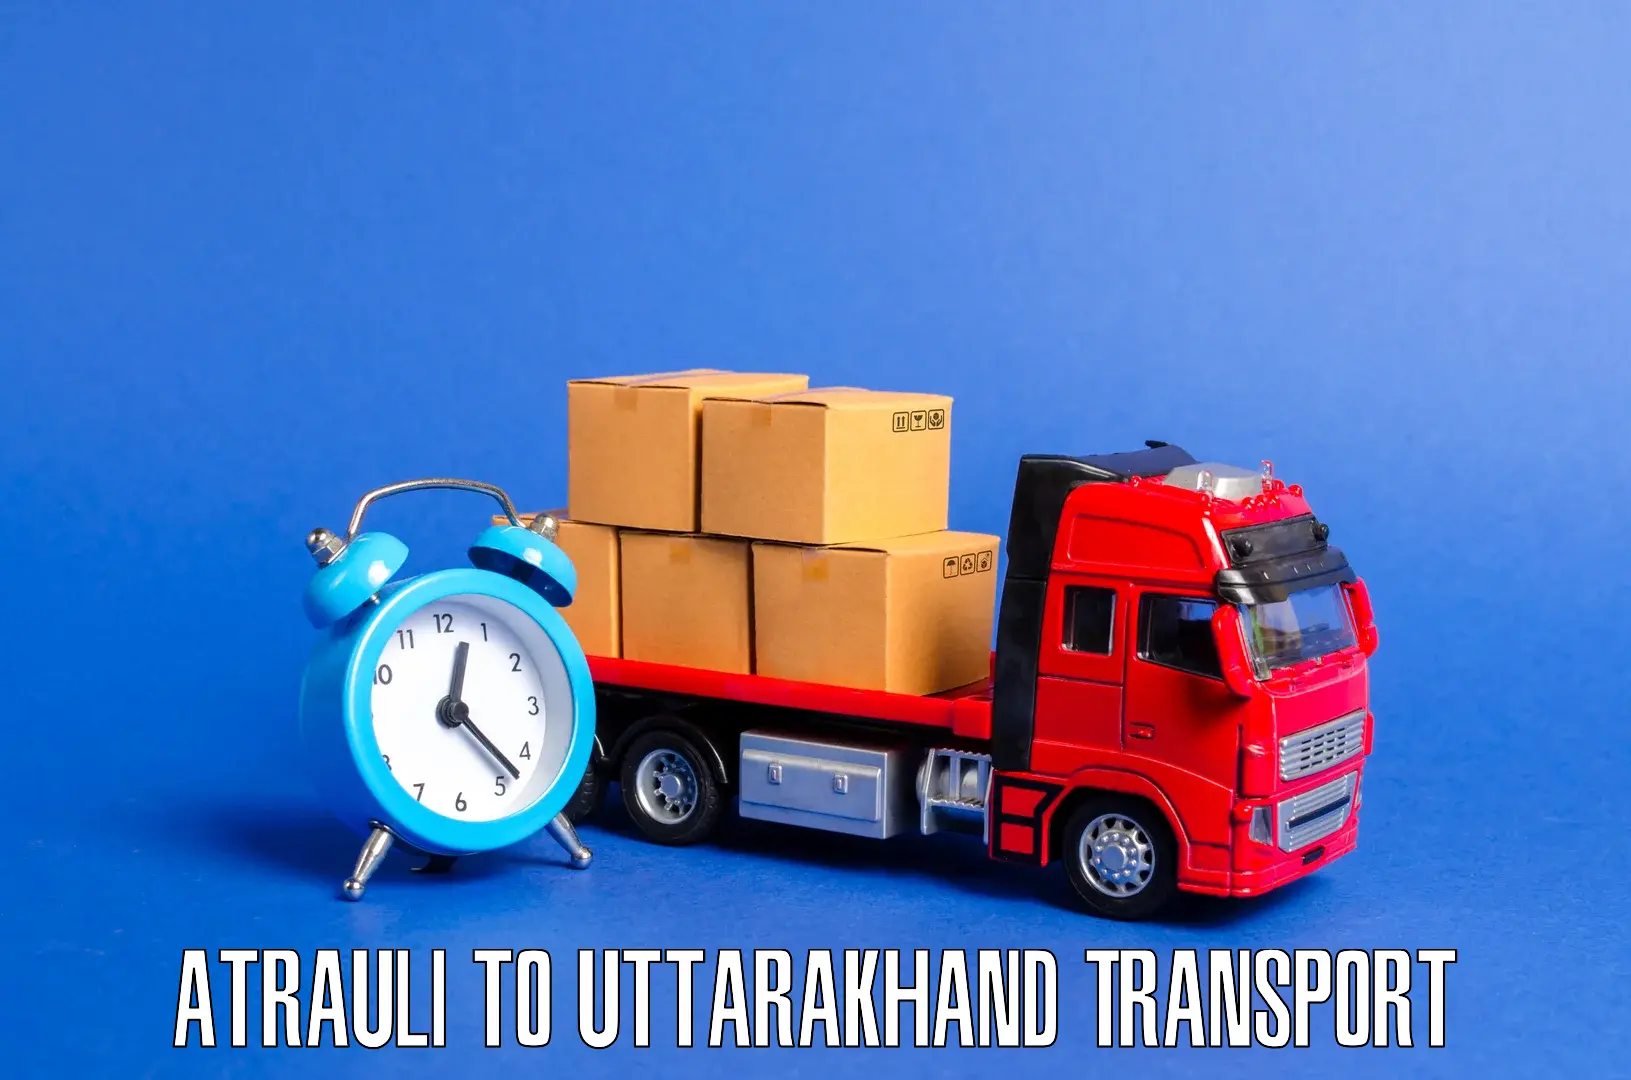 Express transport services Atrauli to IIT Roorkee